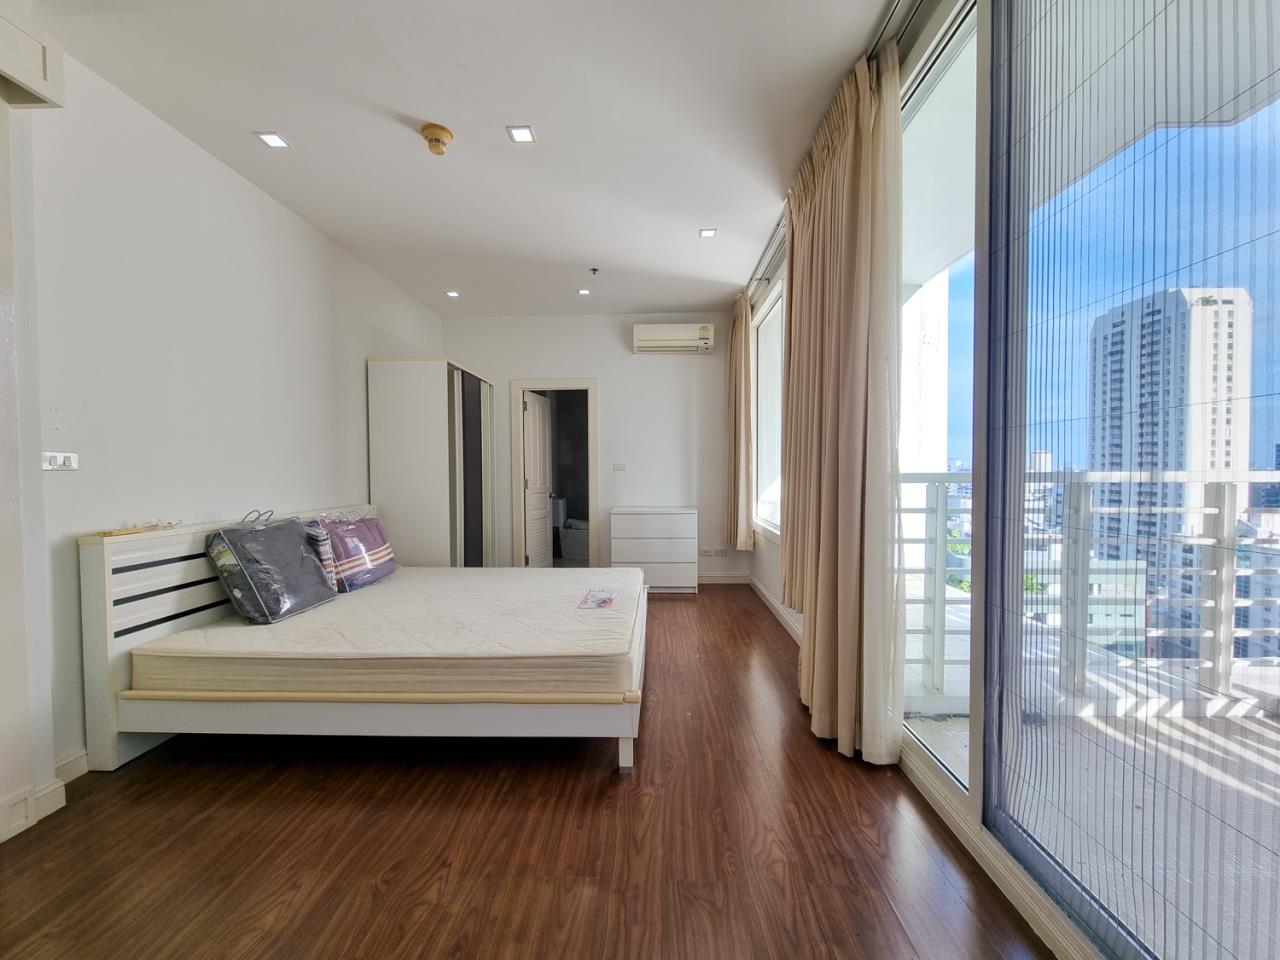 Japanthai Property Agency's *Siri Residence* Huge terrace rare 110sqm 2bed in Phrom Phong area  (5 mins walk to BTS PhromPhong)* 12